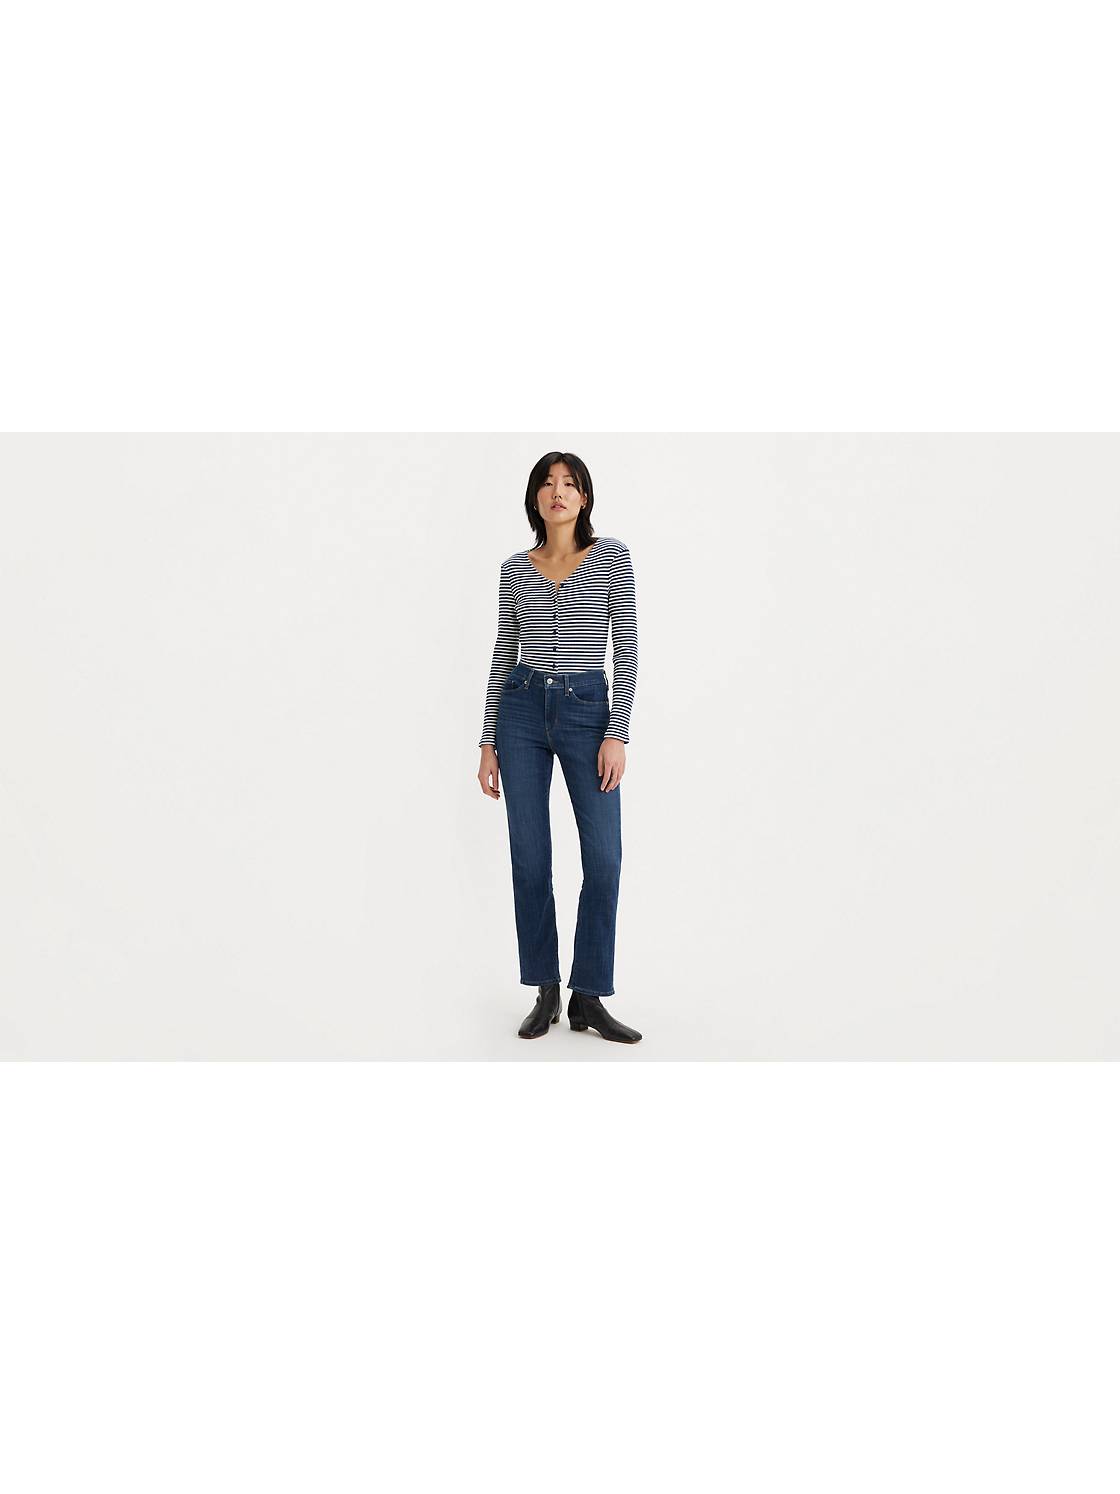 Levi's Straight Fit Mid-Rise Classic Straight Jeans at Tractor